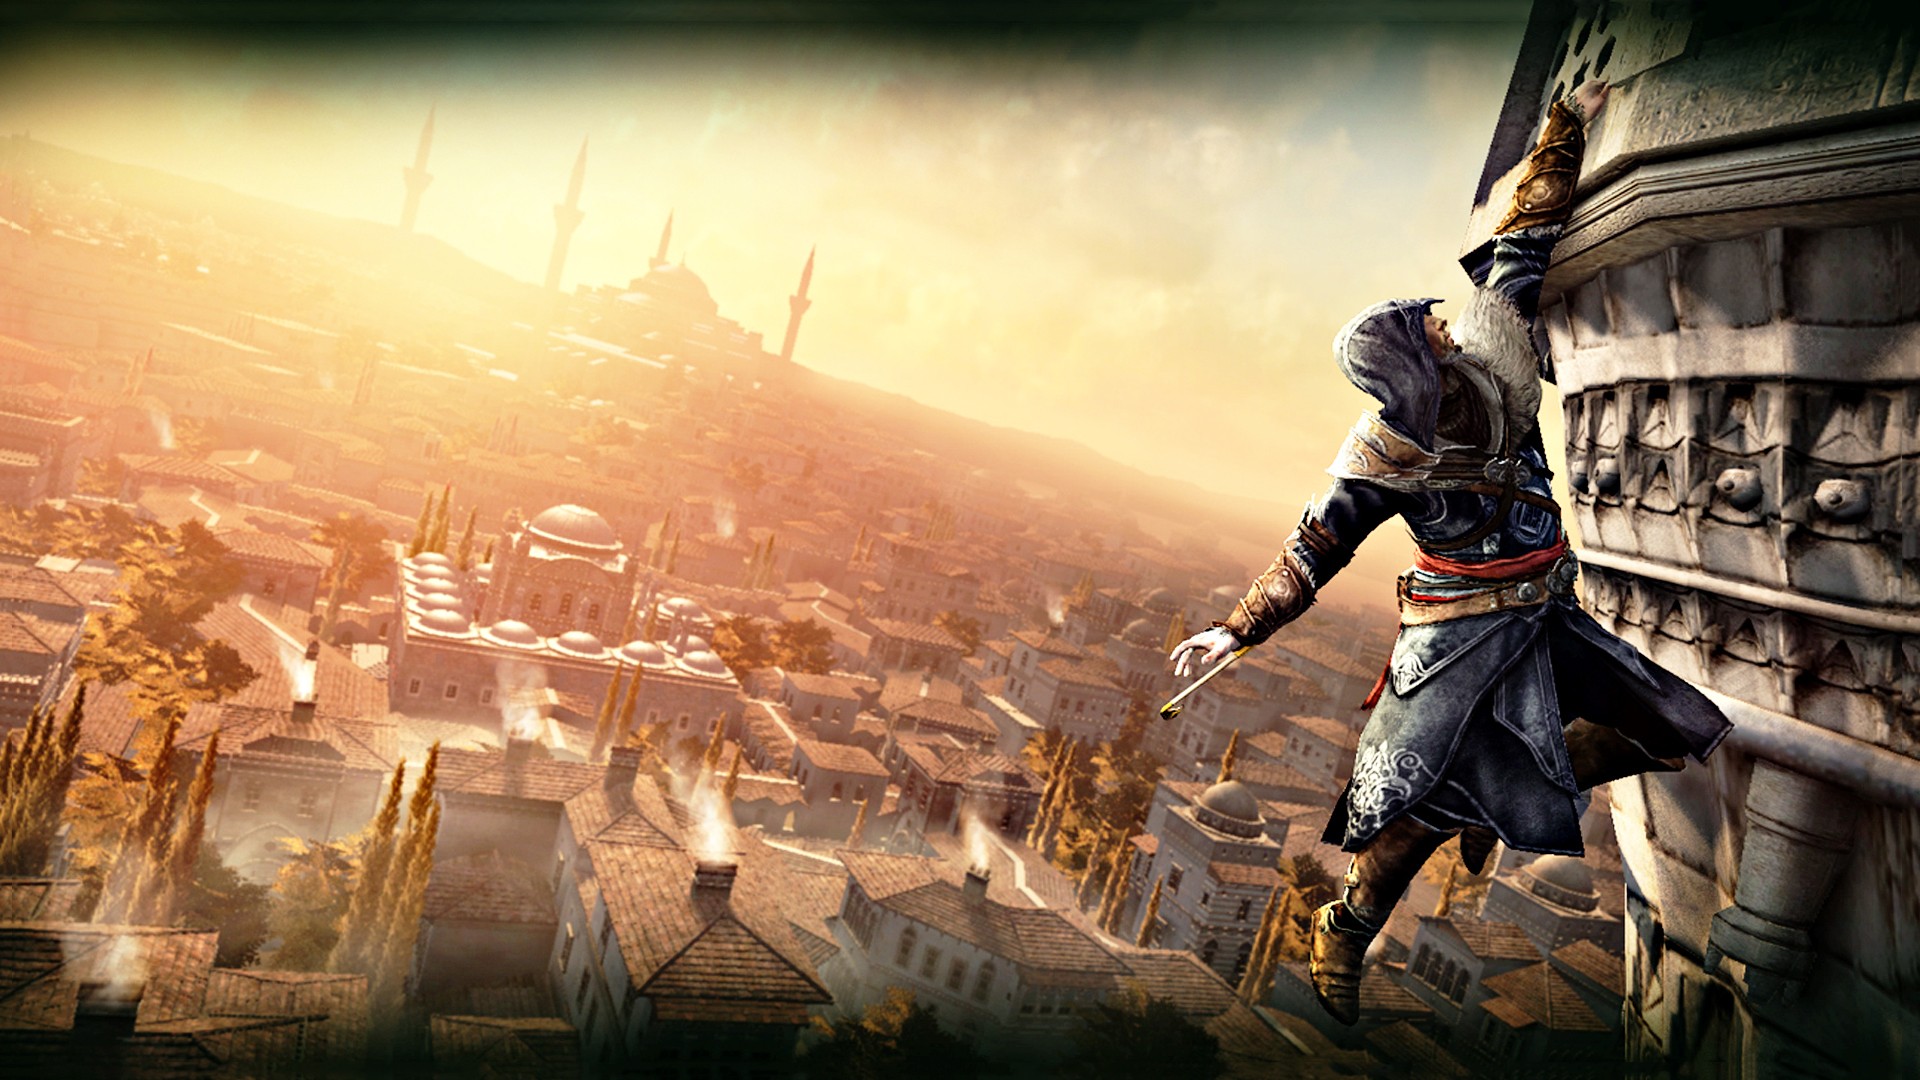 assassin's creed revelations wallpaper,action adventure game,pc game,strategy video game,cg artwork,games